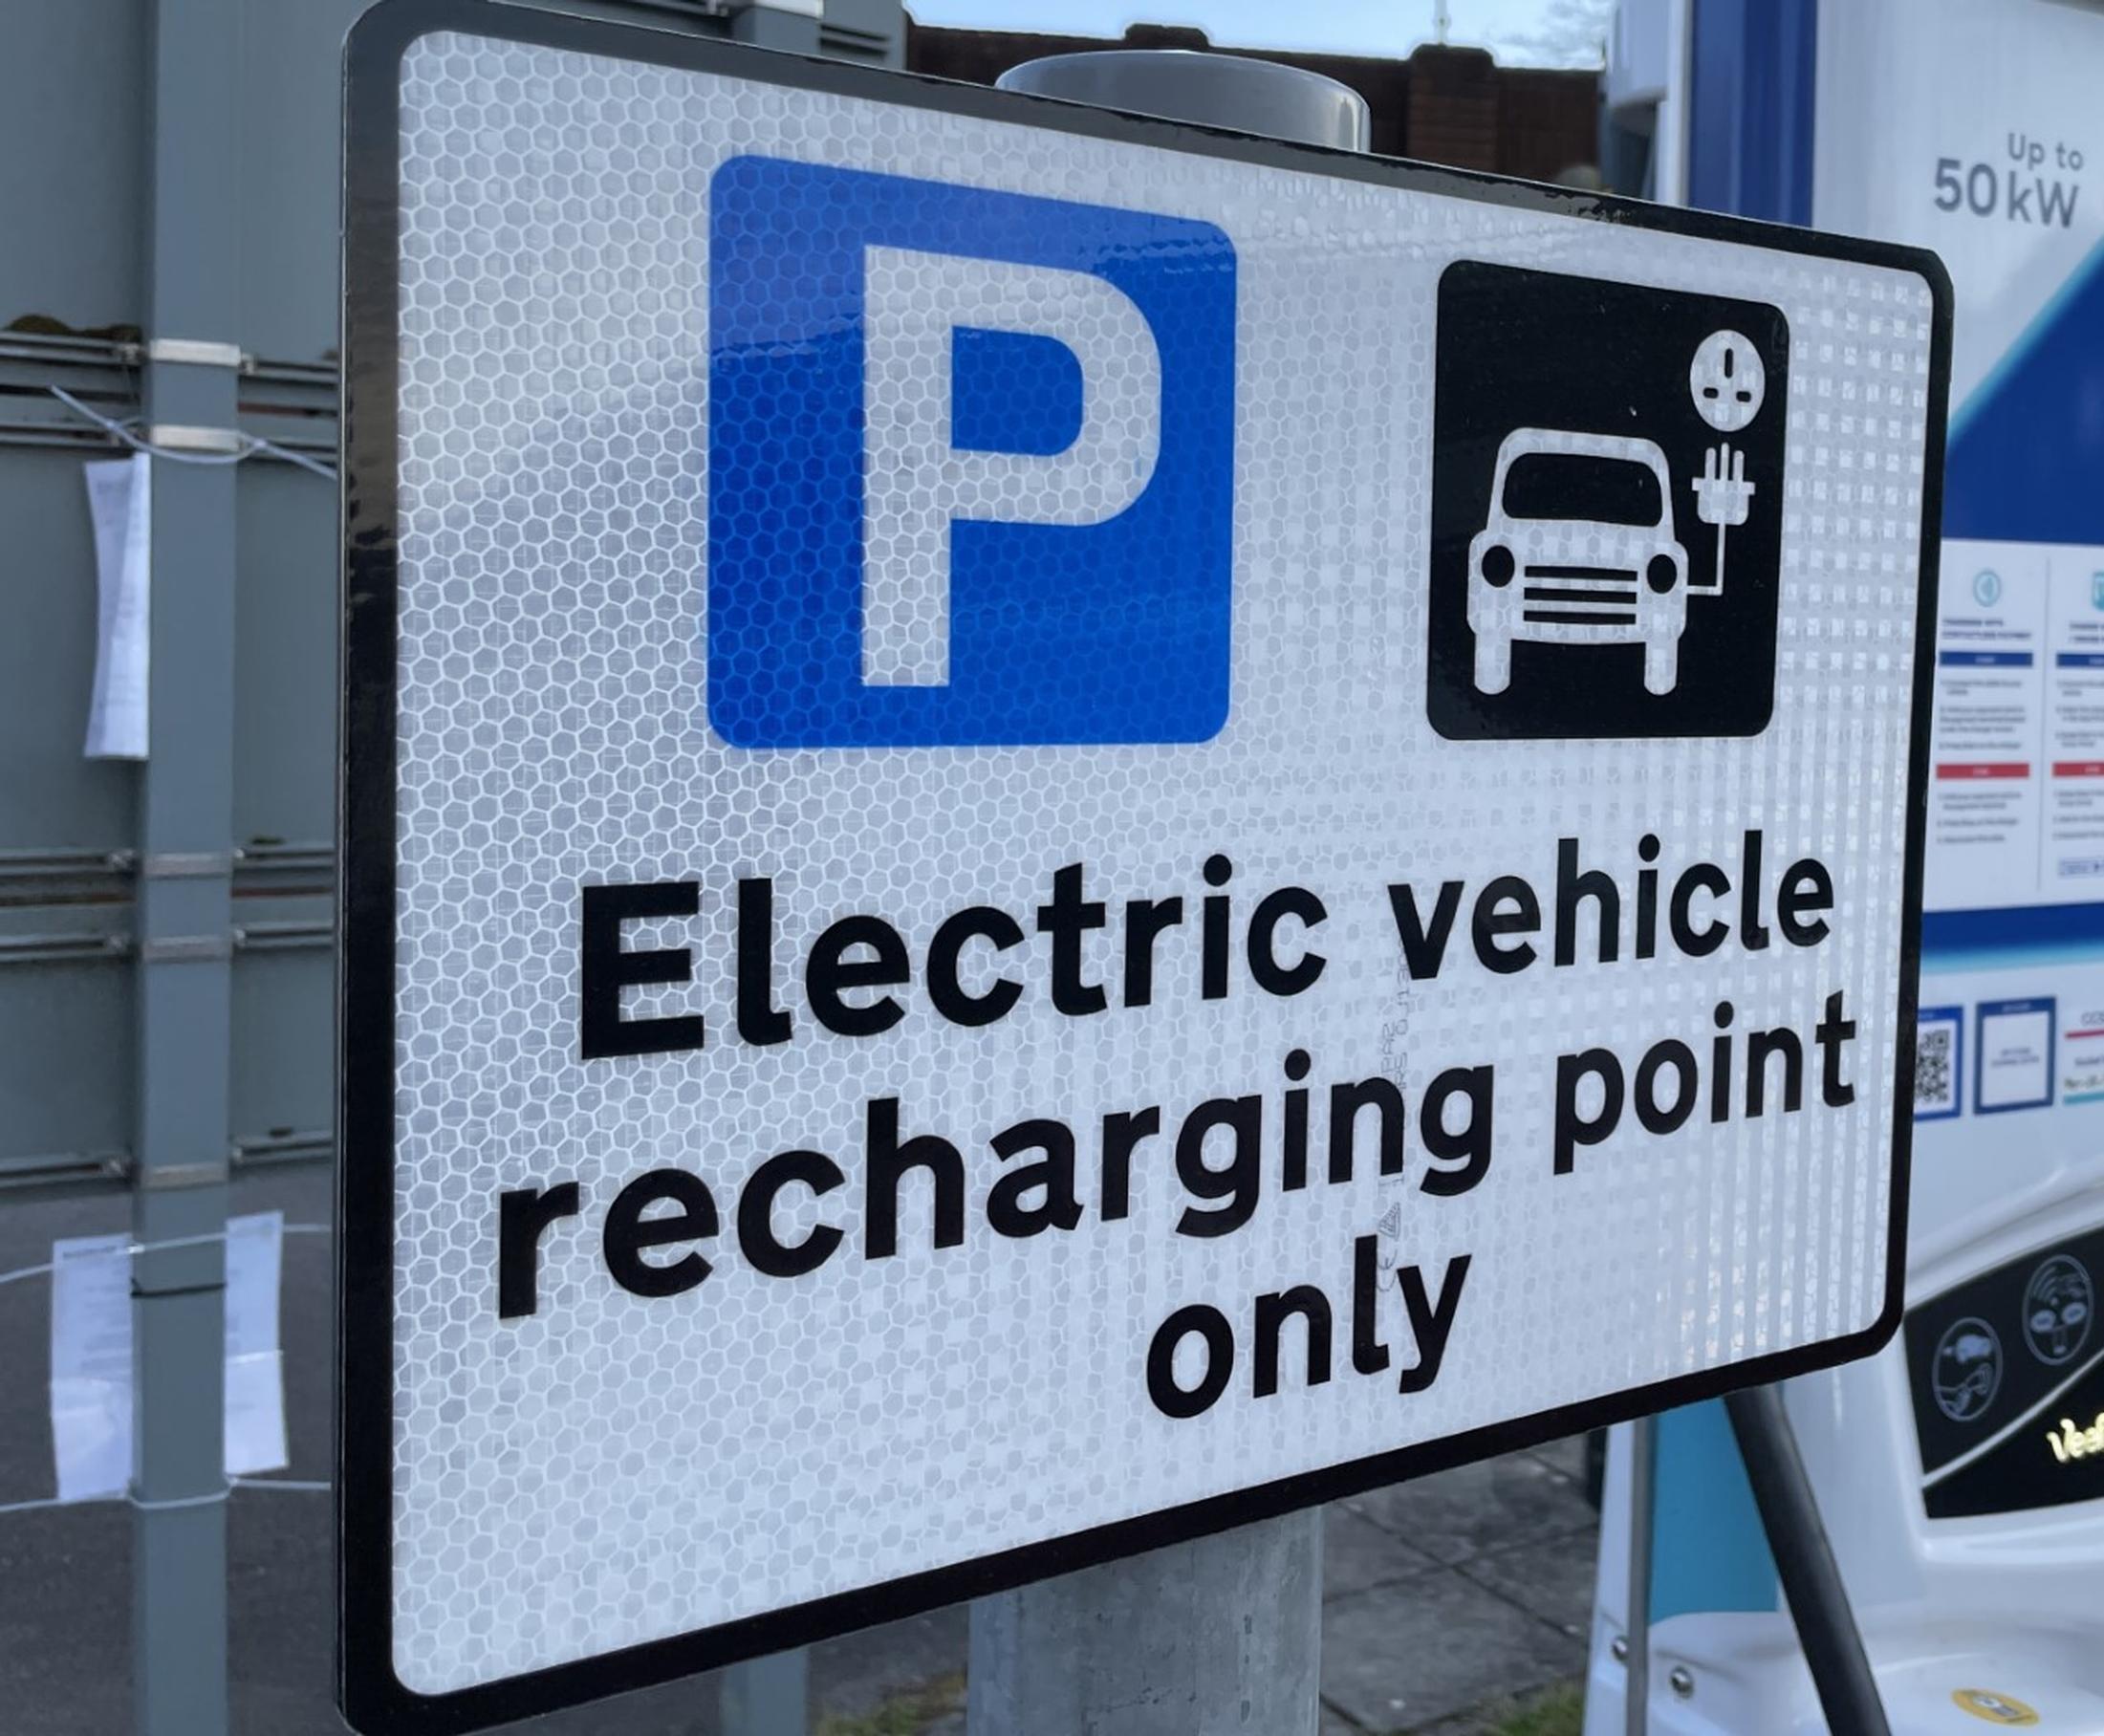 According to the government, by 2030 there will be around 300,000 public chargepoints as a minimum in the UK